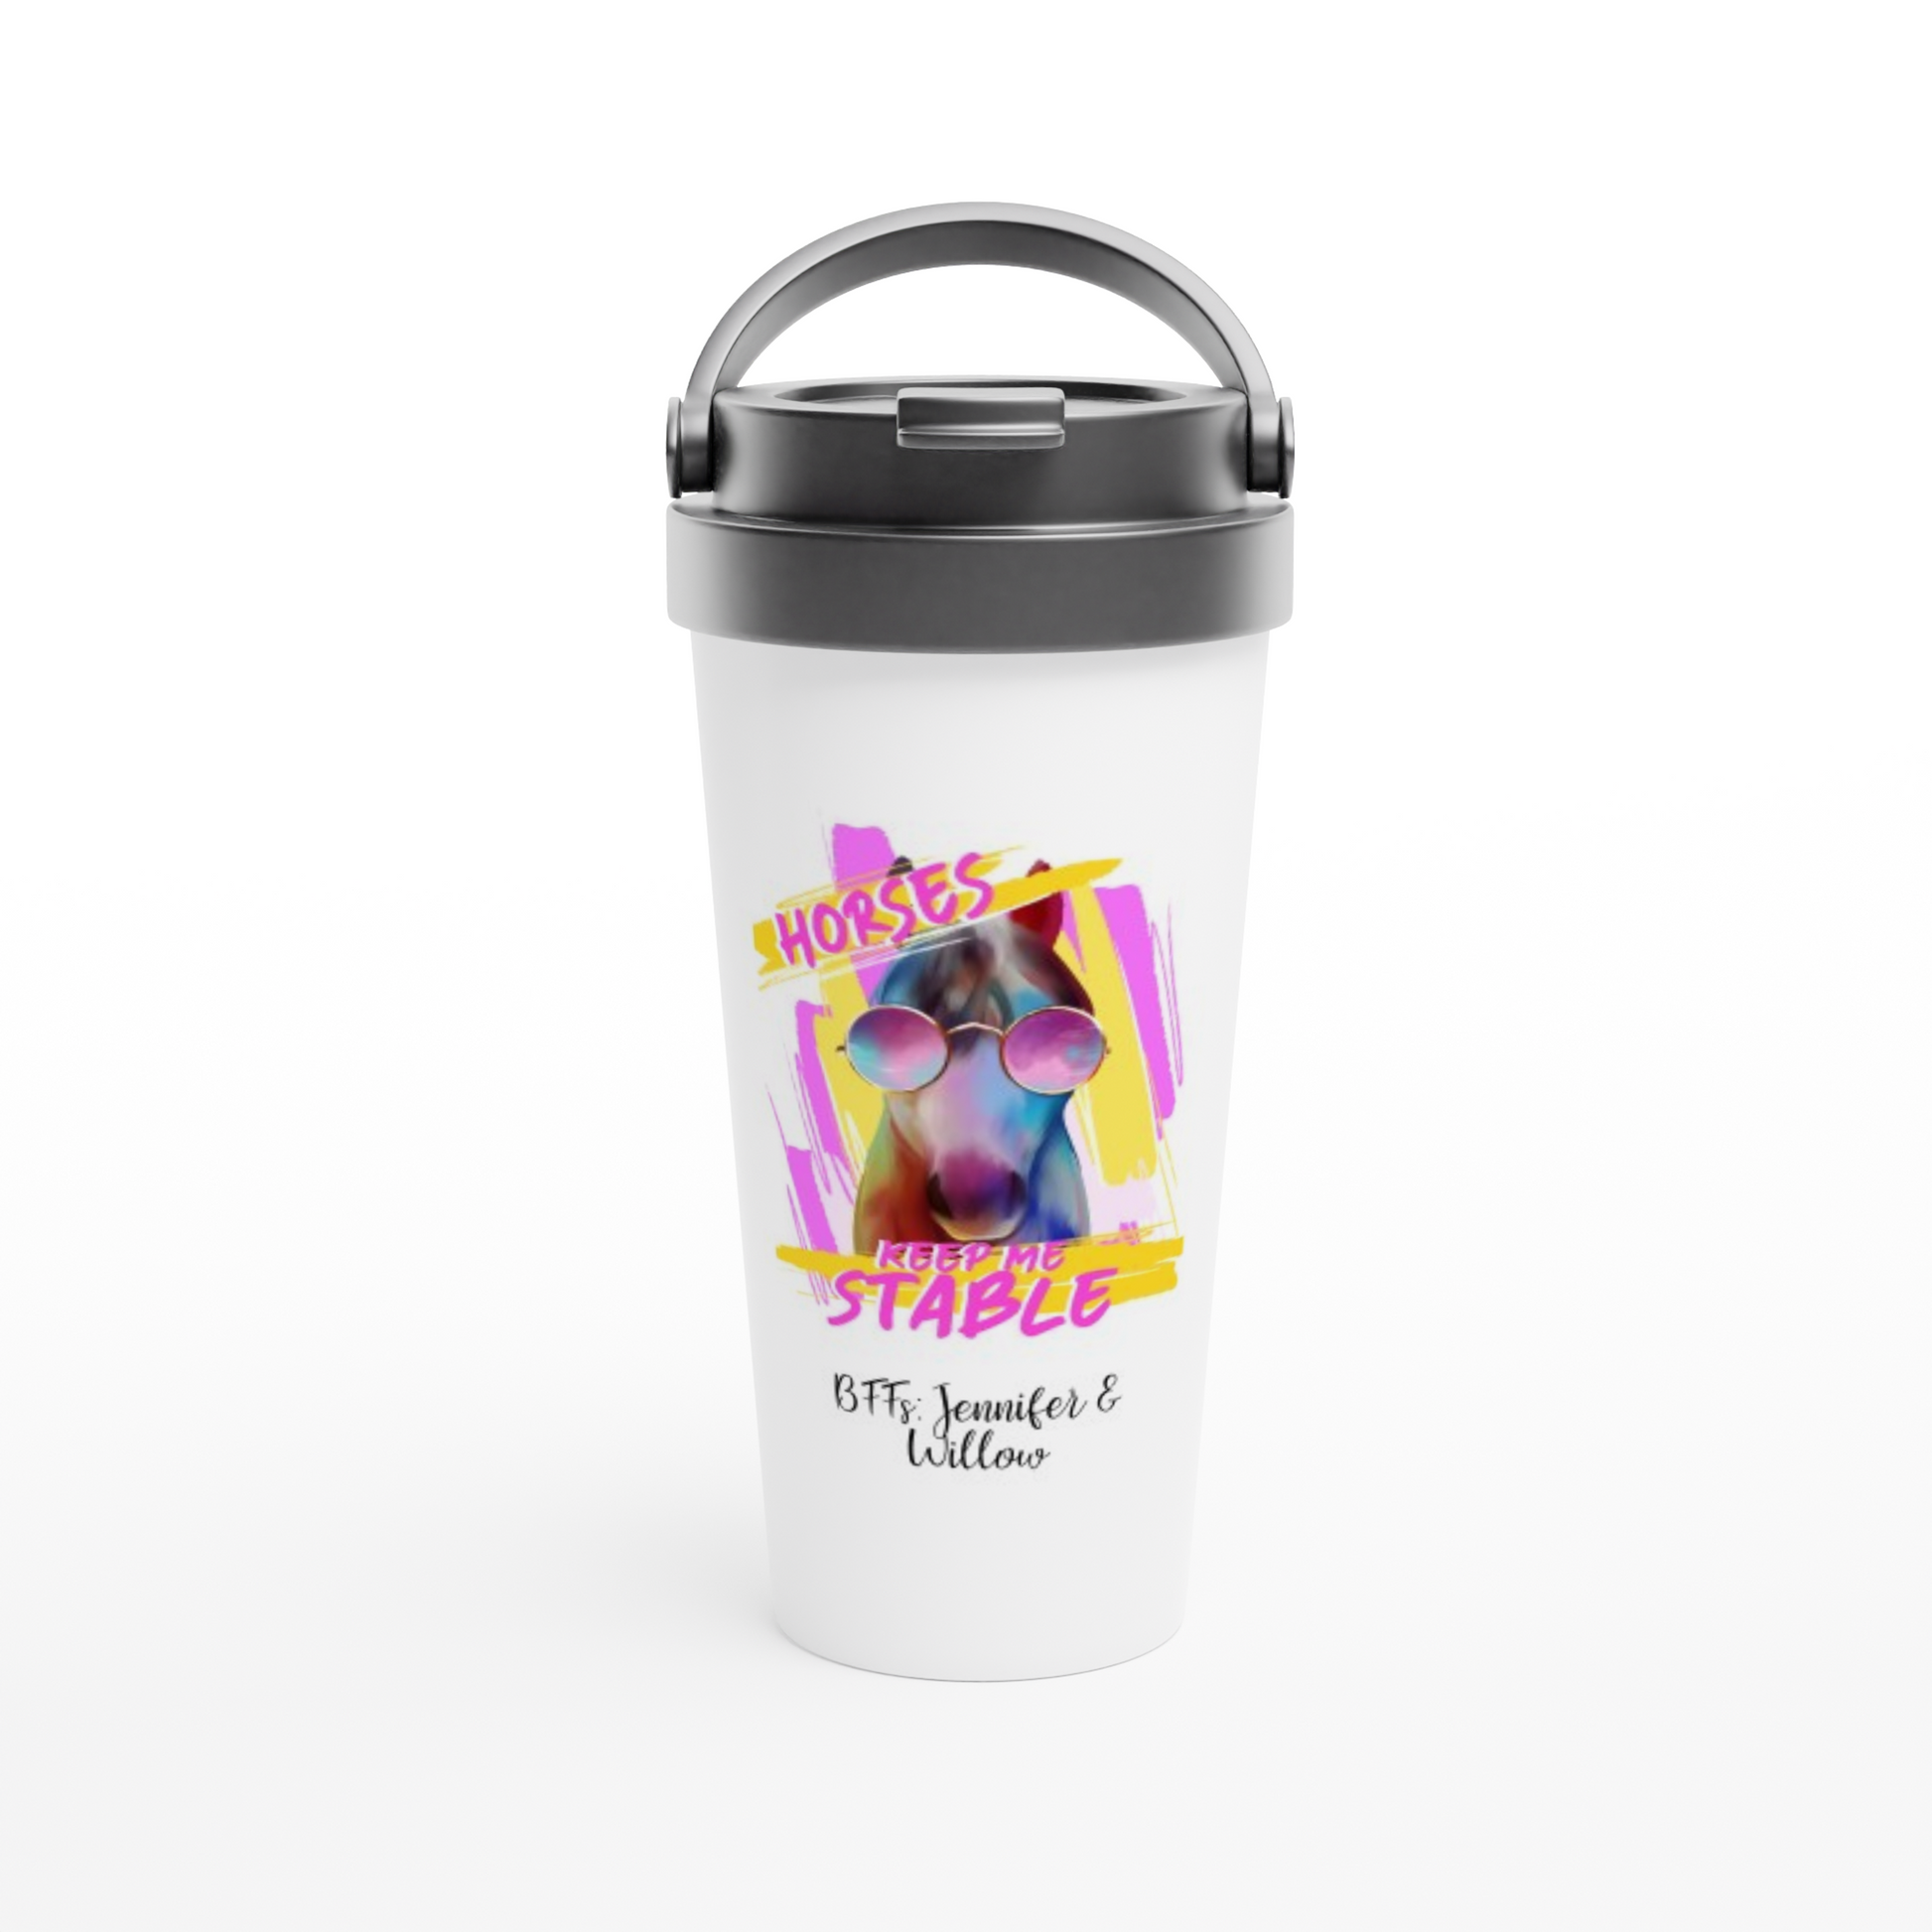 Hand Drawn Horse || 15oz Stainless Steel Travel Mug - Design: "Stable"; Static Design; Personalizable Text